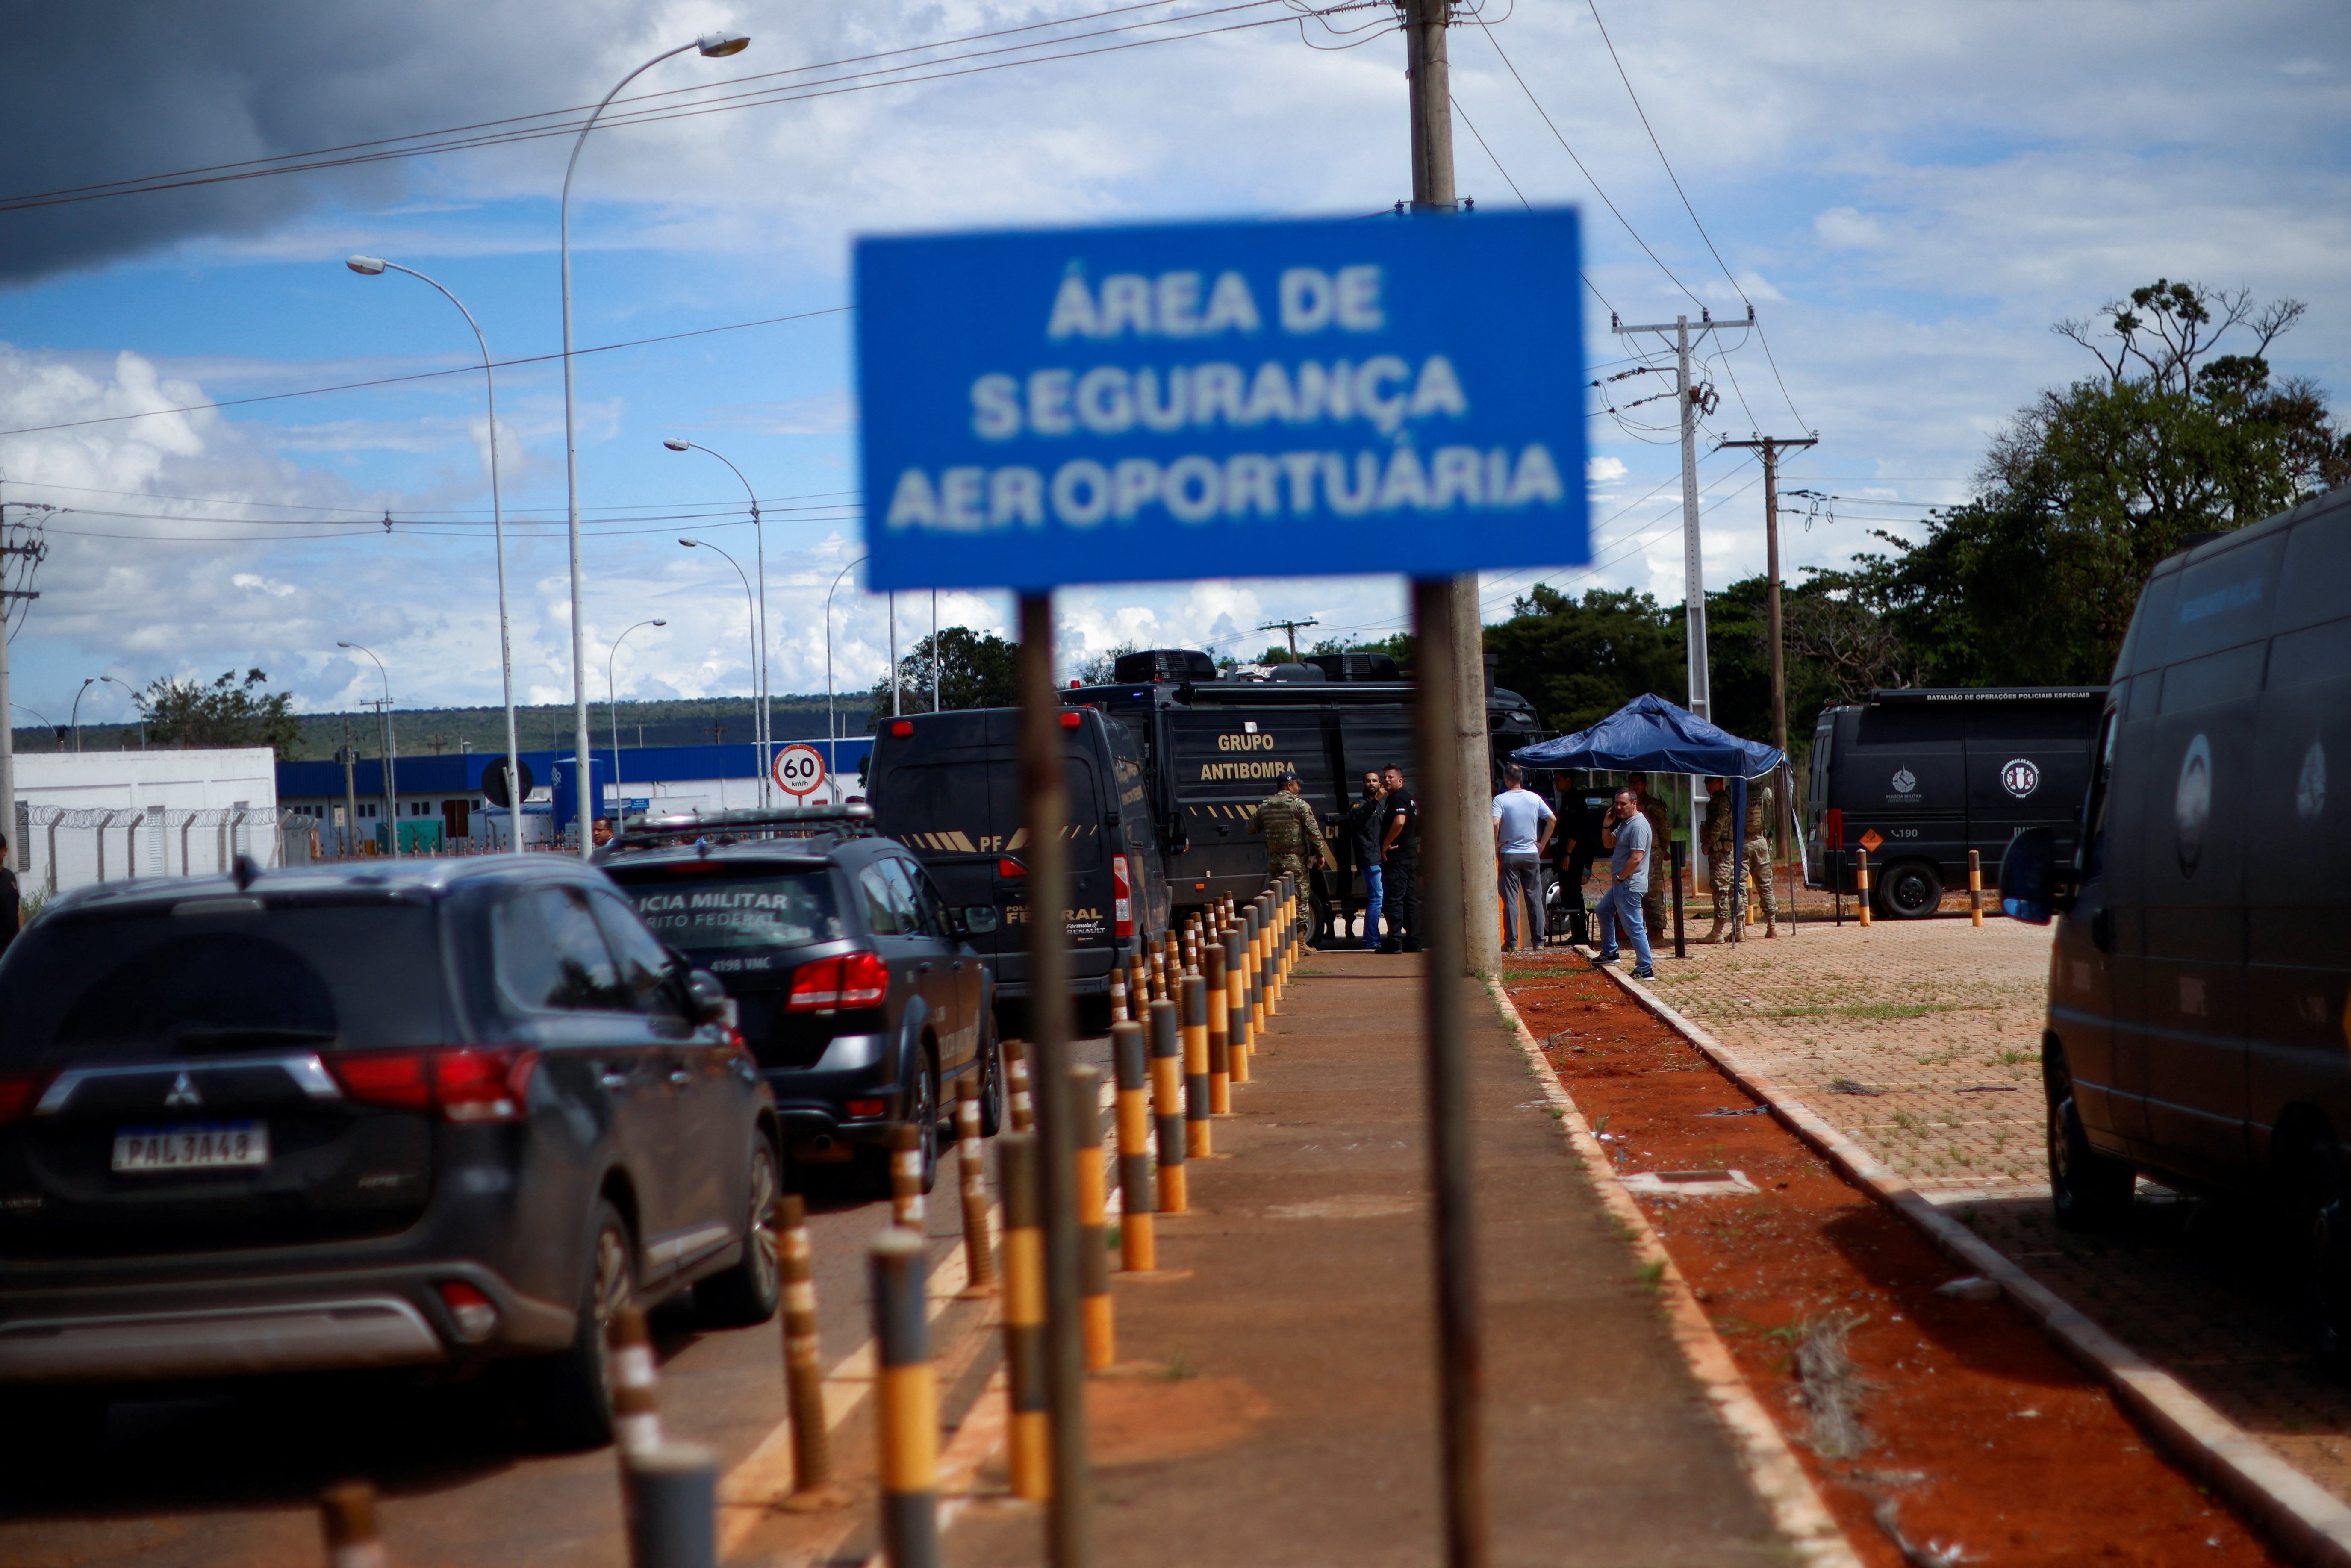 A vehicle of the anti-bomb group of the Federal Police is pictured in Brasilia